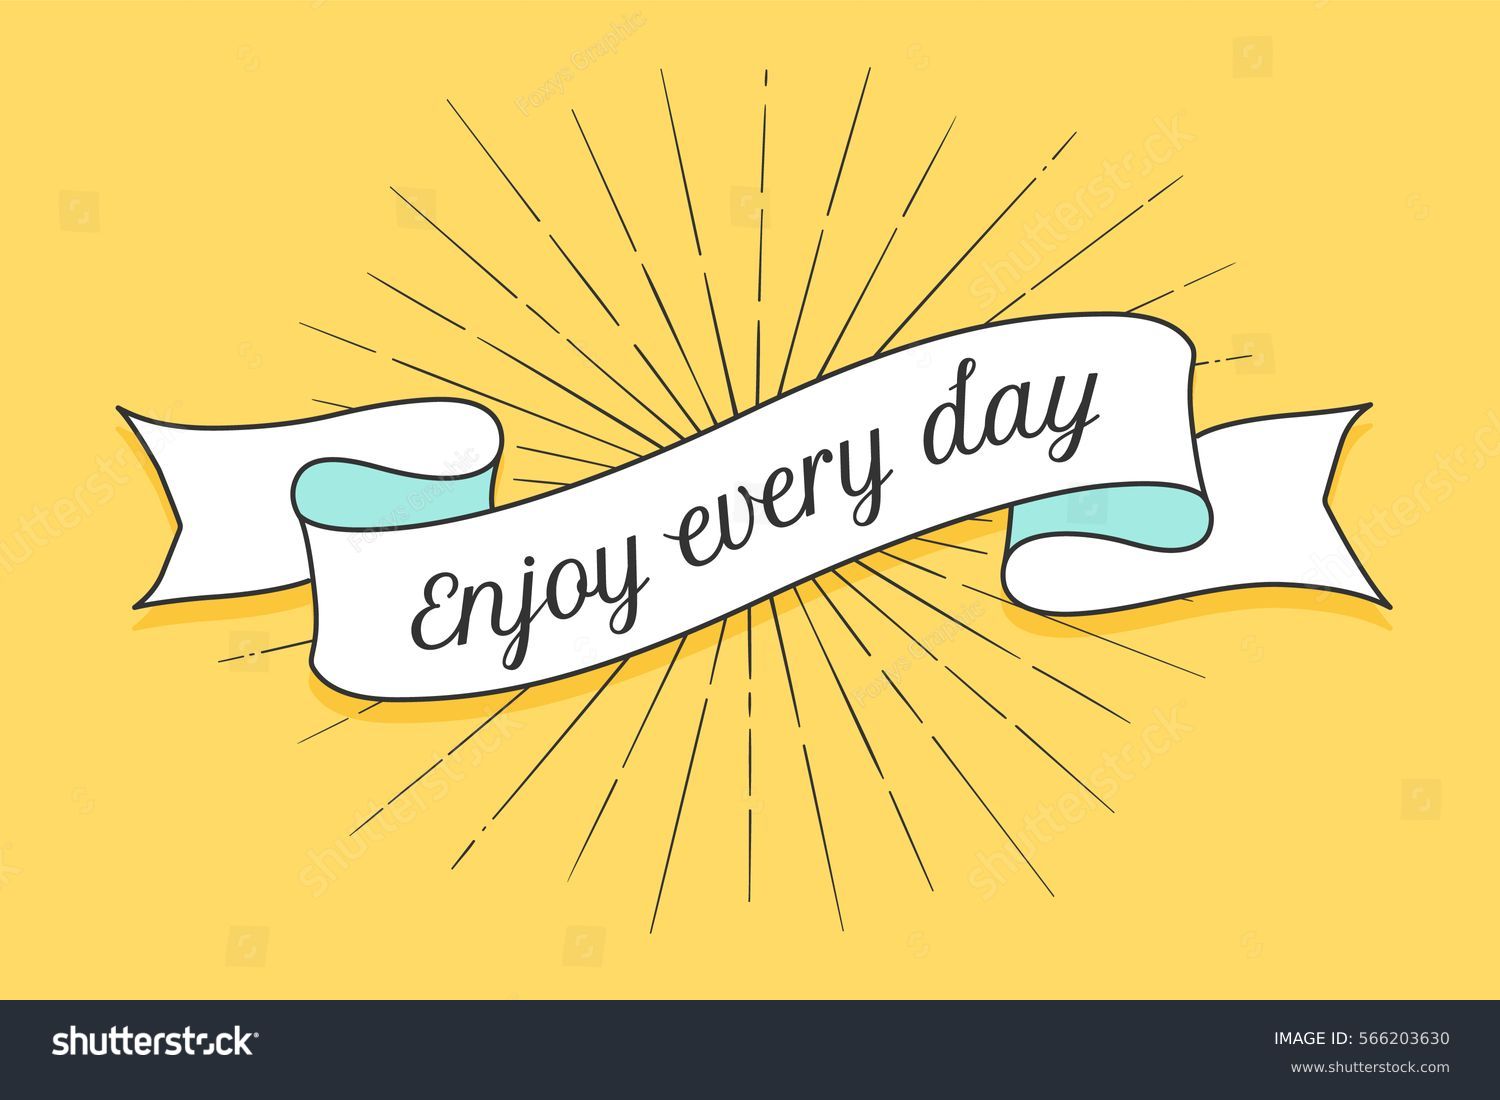 Ribbon with text Enjoy every day. Colorful vintage banner with ribbon and light rays, sunburst. Hand-drawn element for design - banners, posters, gift cards, advertising and web. Vector Illustration #566203630